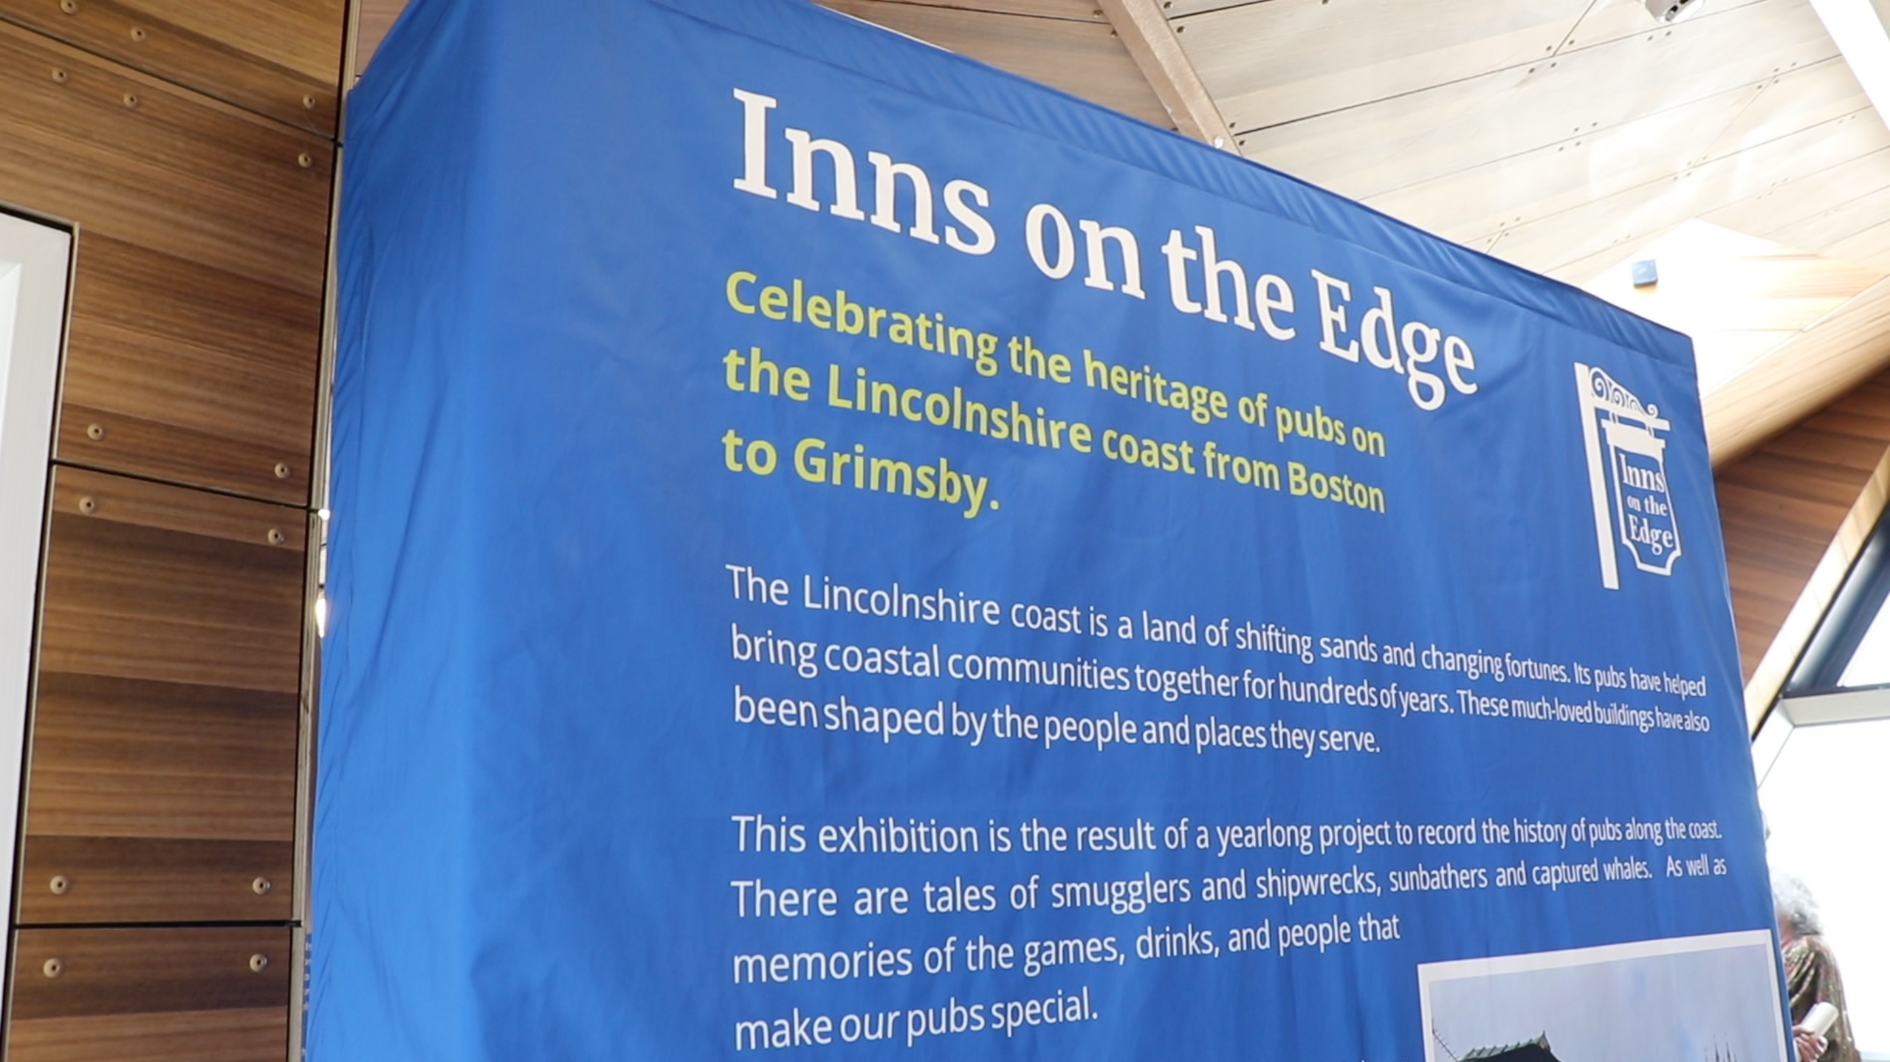 A glimpse of the Inns on the Edge exhibition